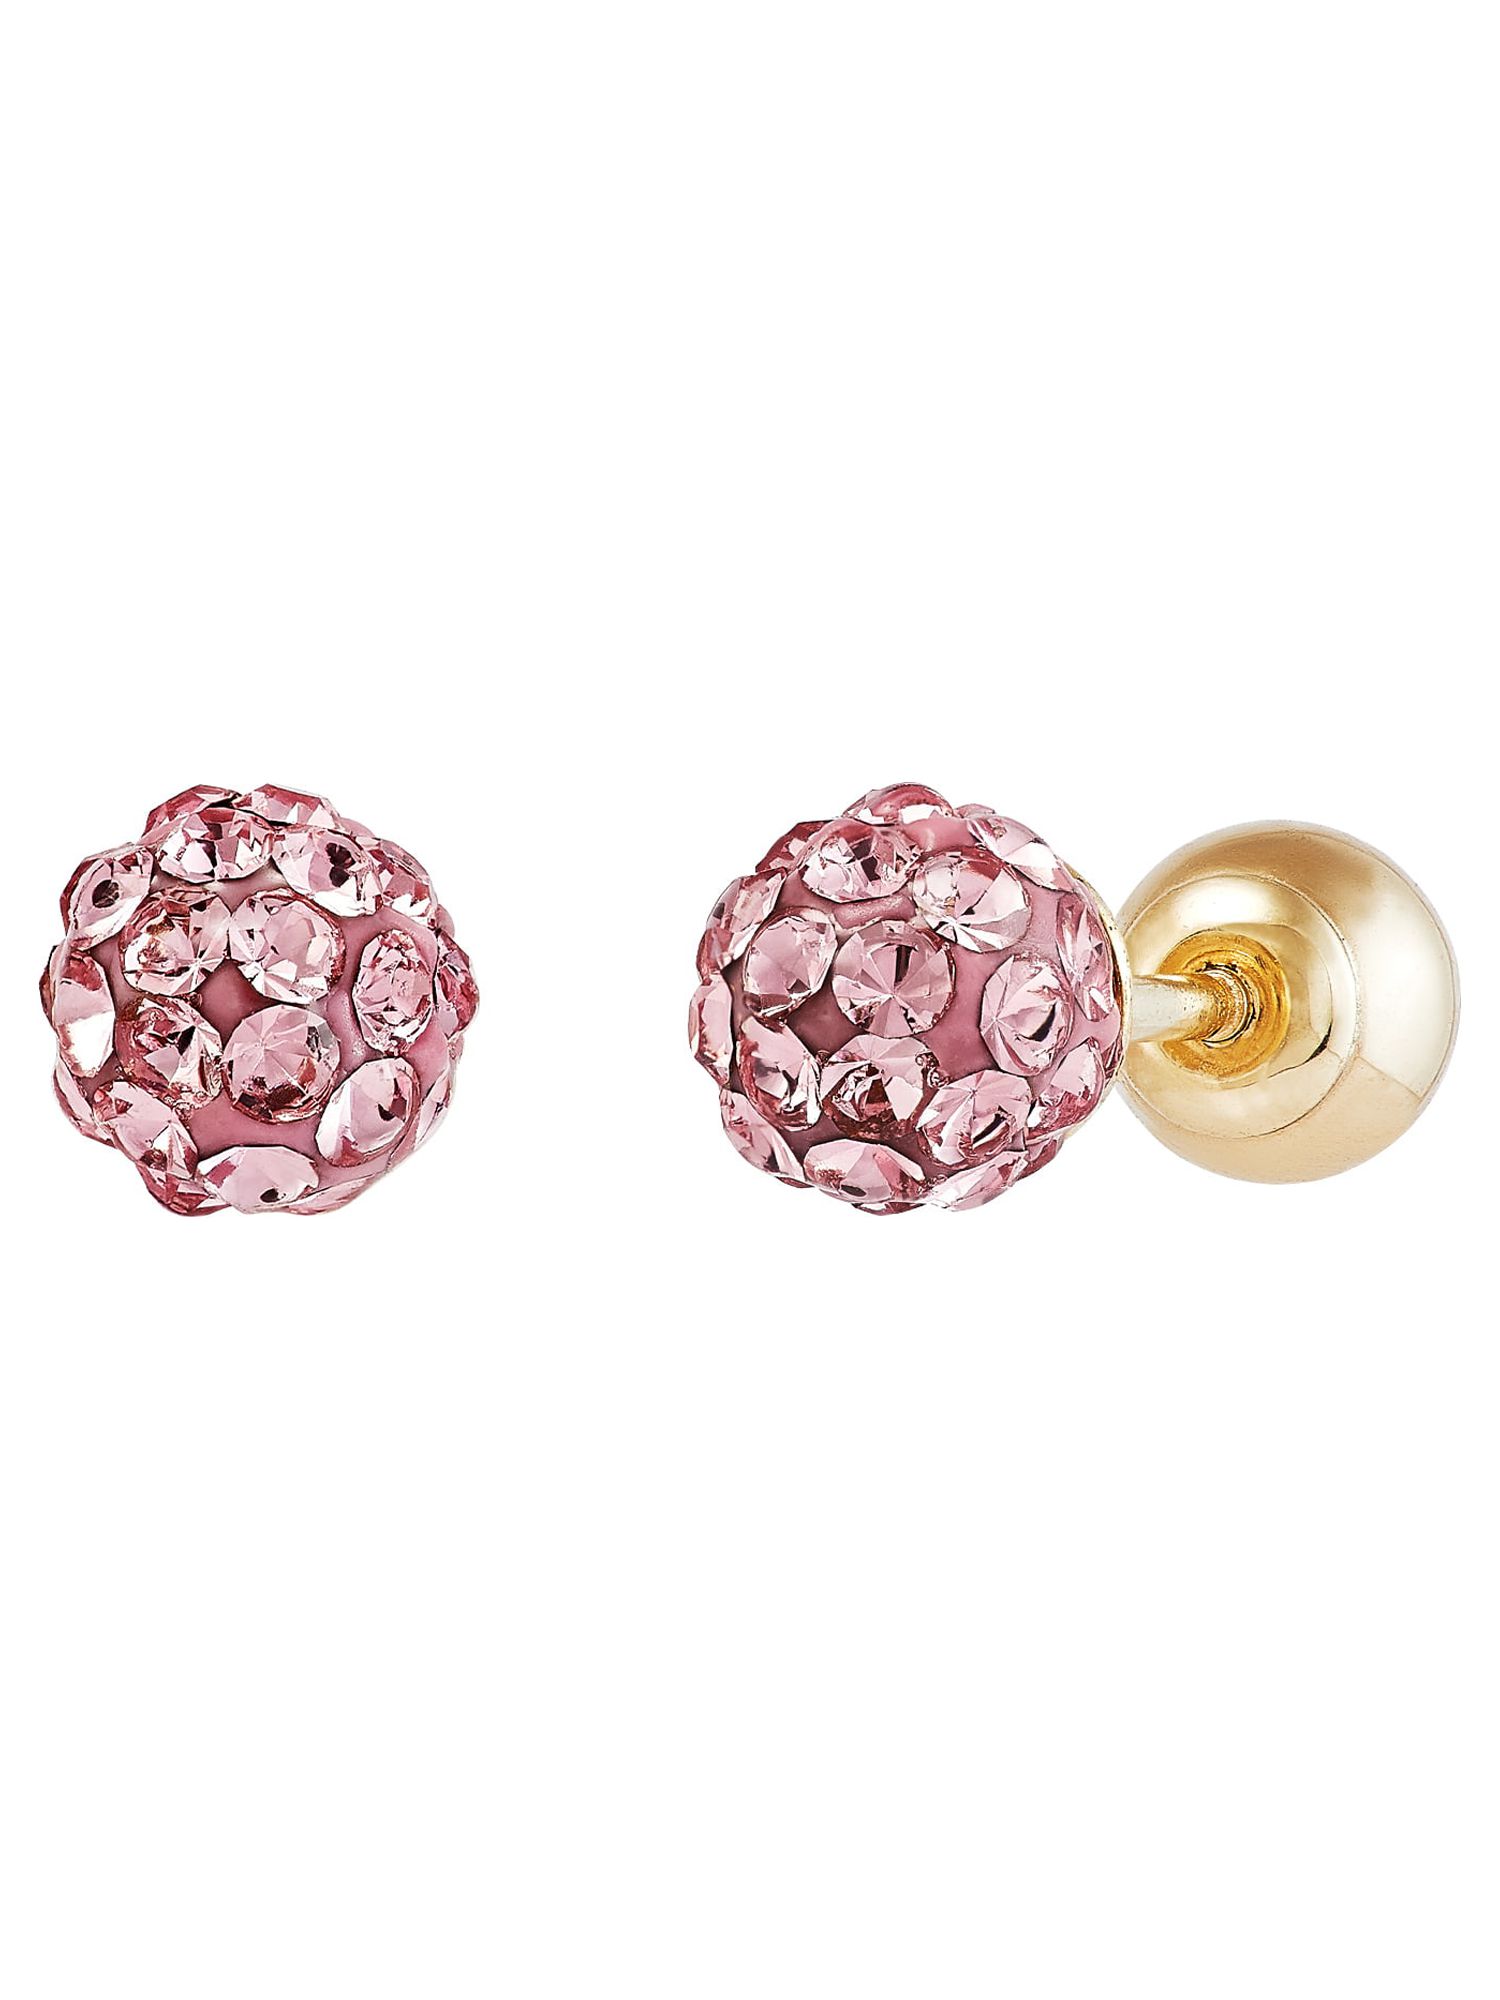 Brilliance Fine Jewelry Pink Crystals 4.8MM Studs Earrings in 10K Yellow Gold - image 4 of 10